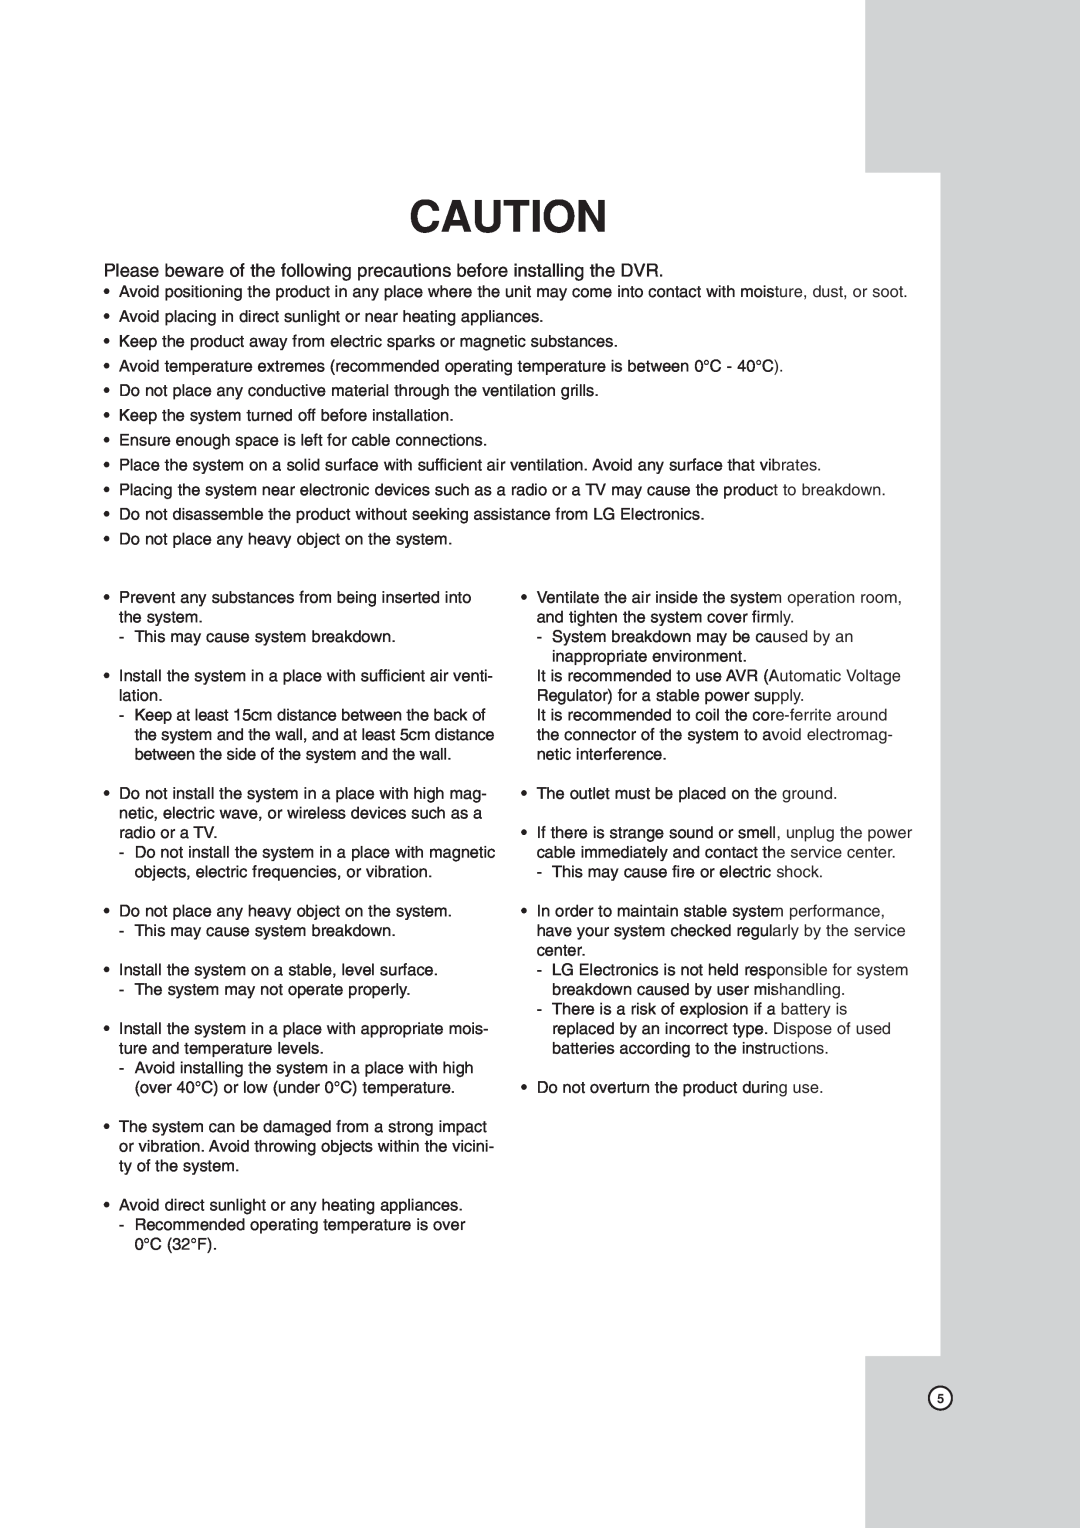 LG Electronics LDV-S503, LDV-S504 owner manual Please beware of the following precautions before installing the DVR 